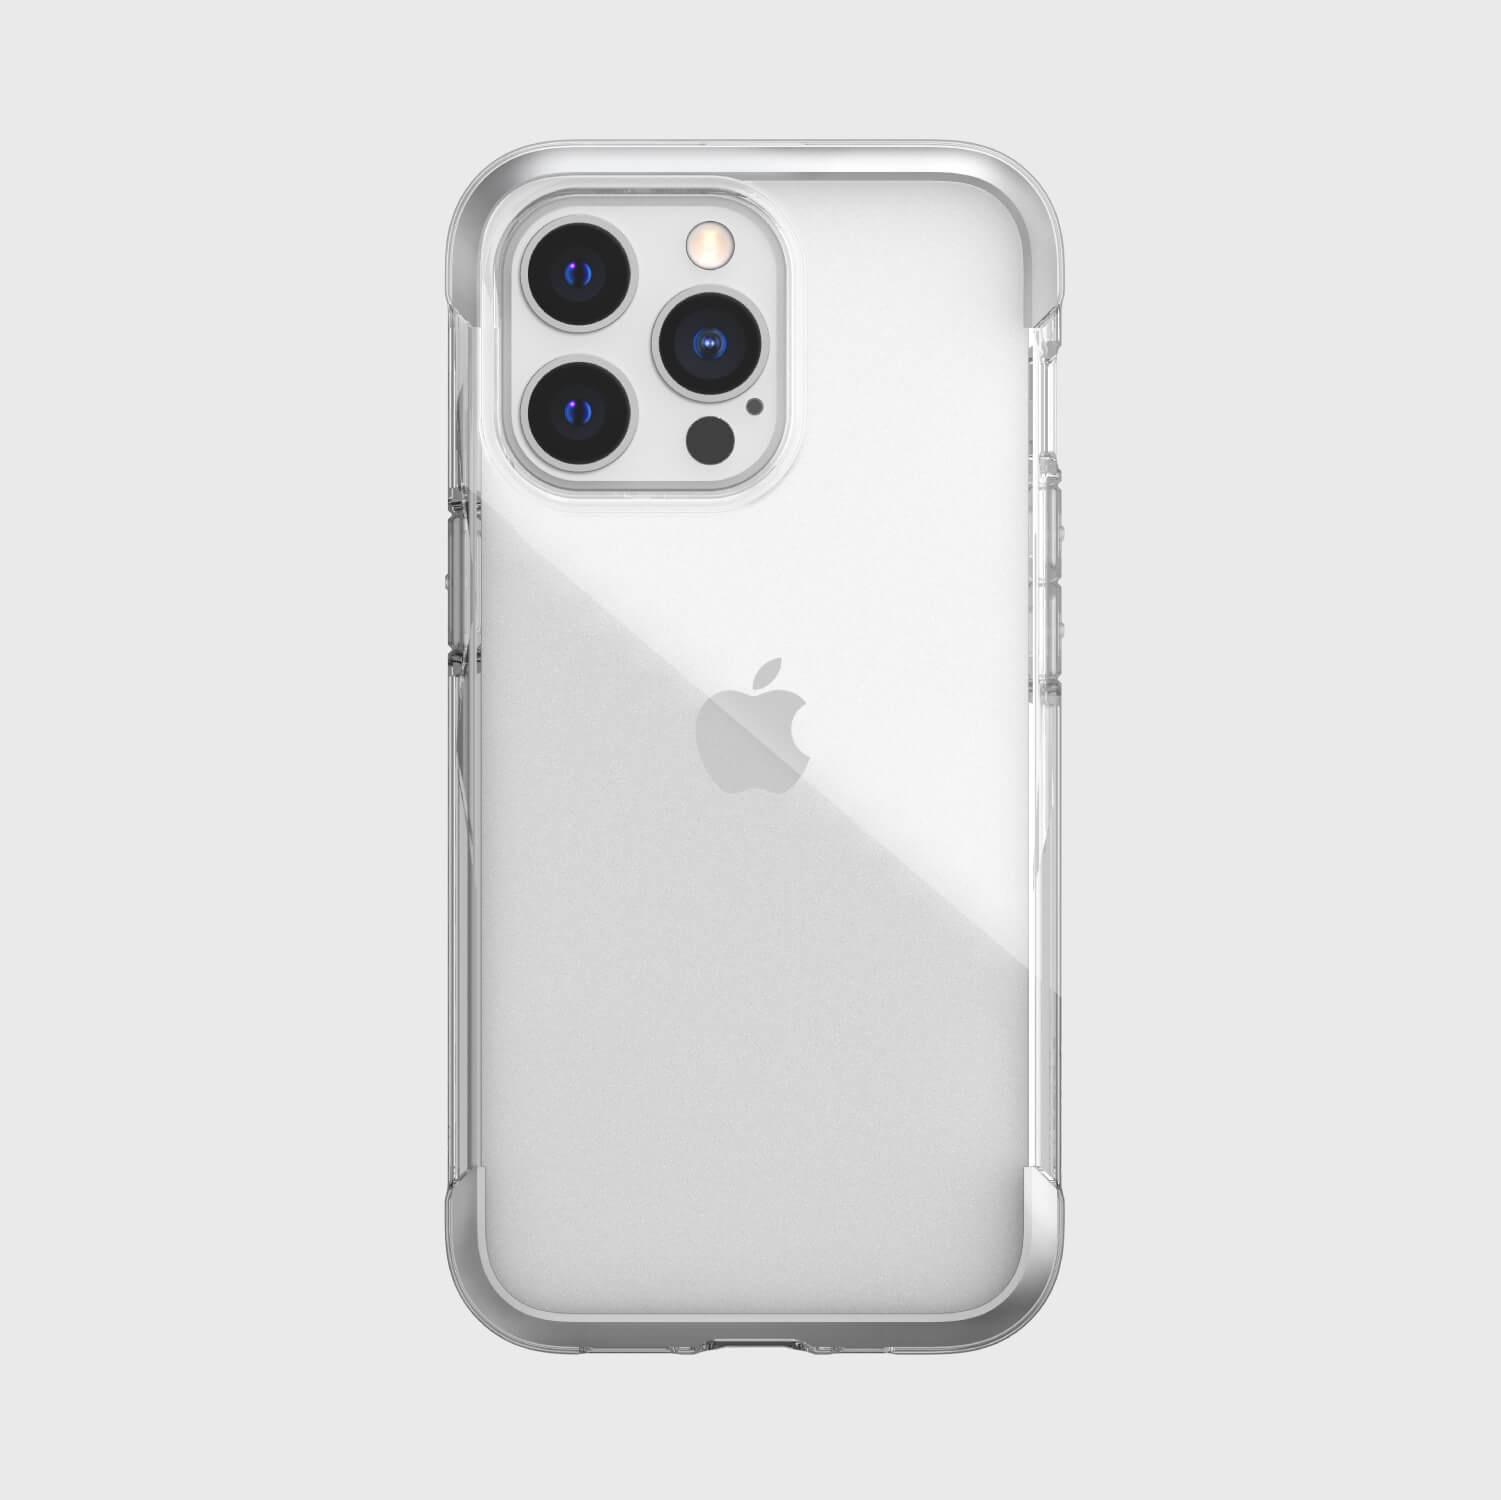 A white iPhone 13 Pro Case - AIR from Raptic with wireless charging compatibility.